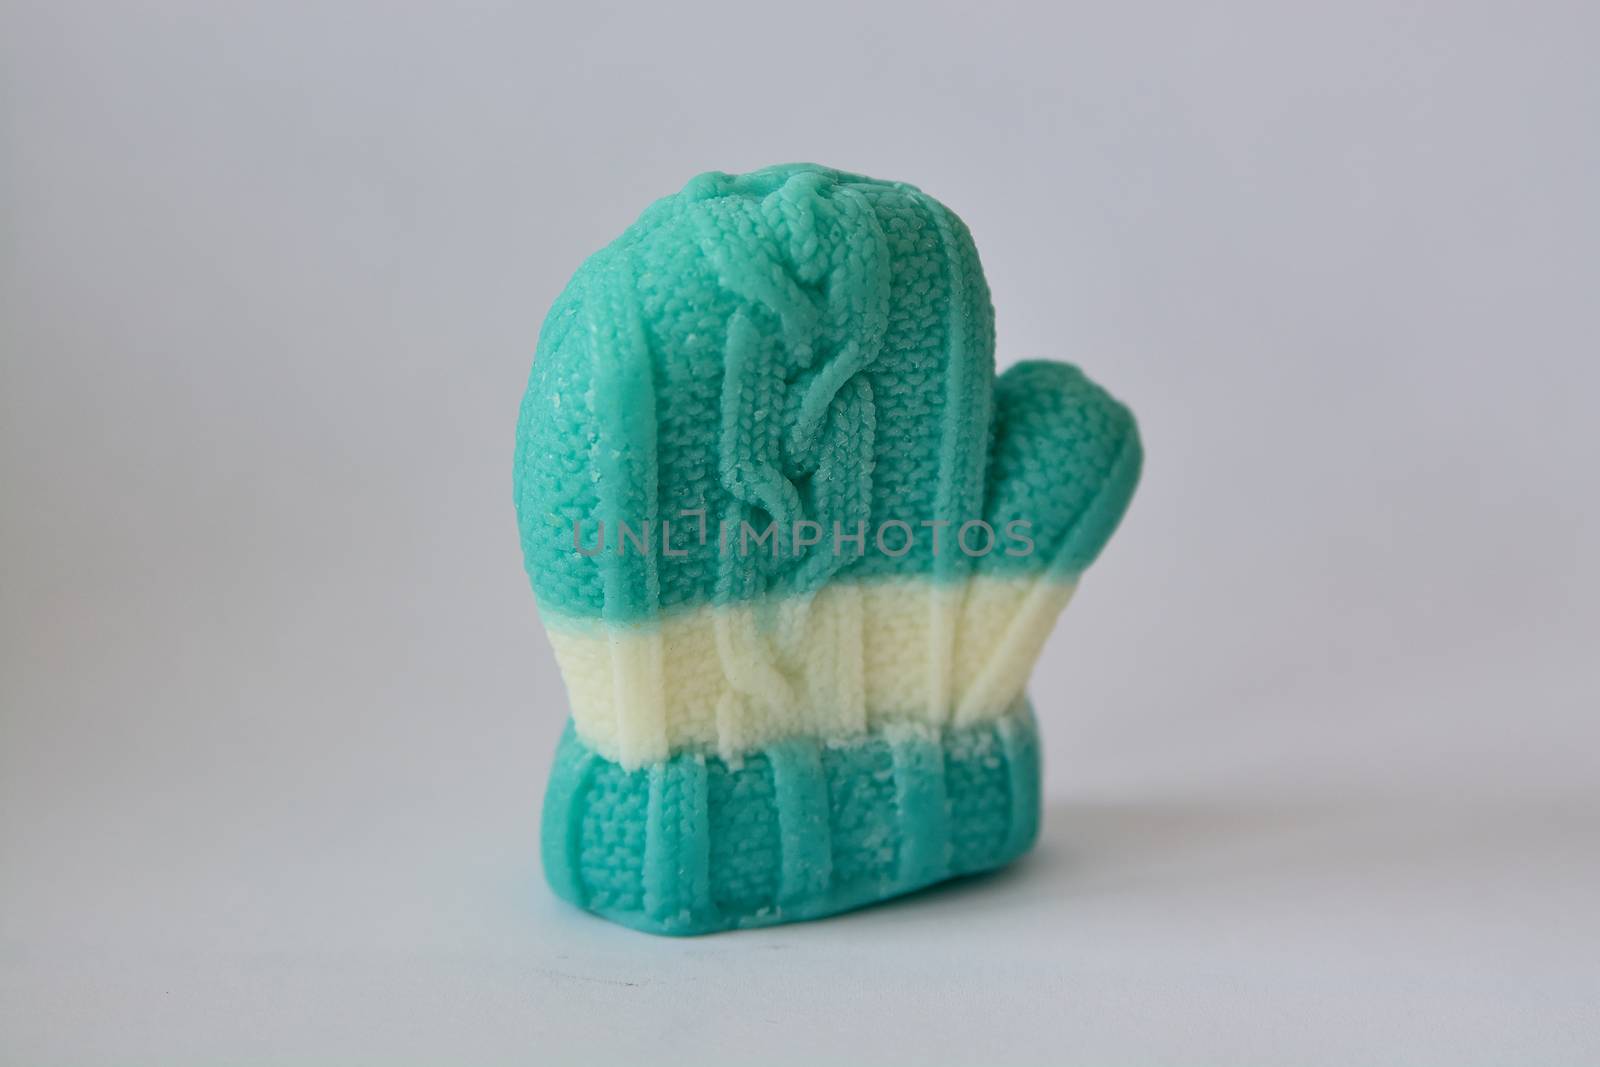 Soap gift in the form of winter mittens on a gray background.